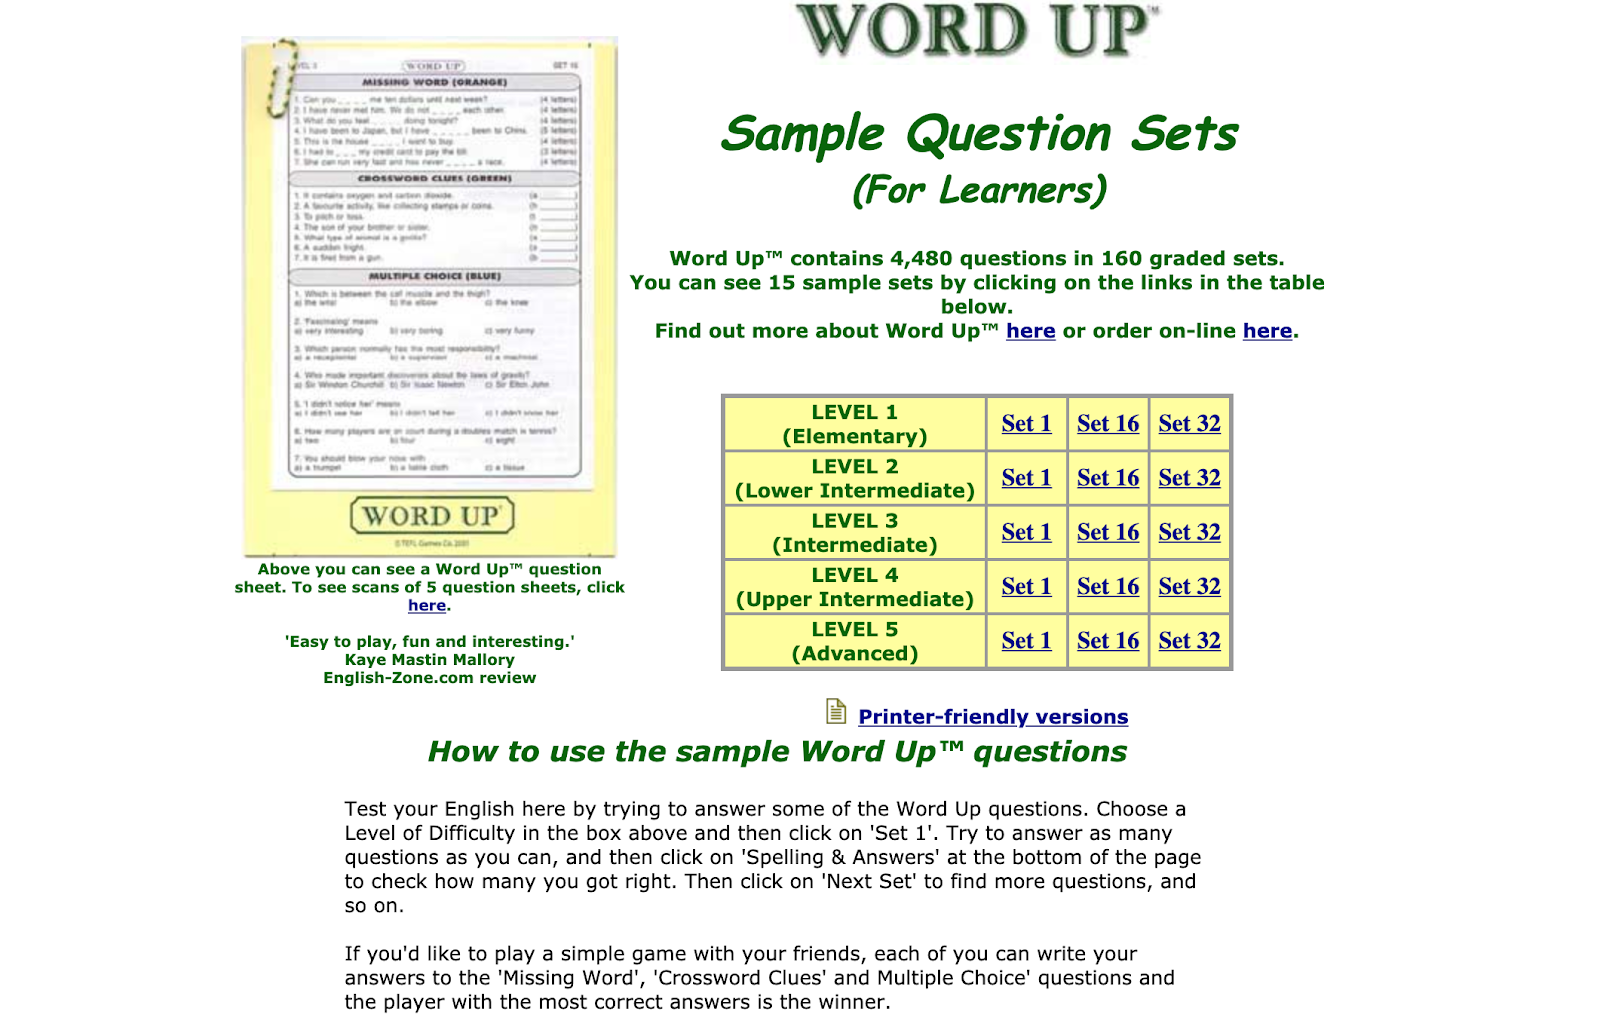 Giao diện game Word up của TeflGames